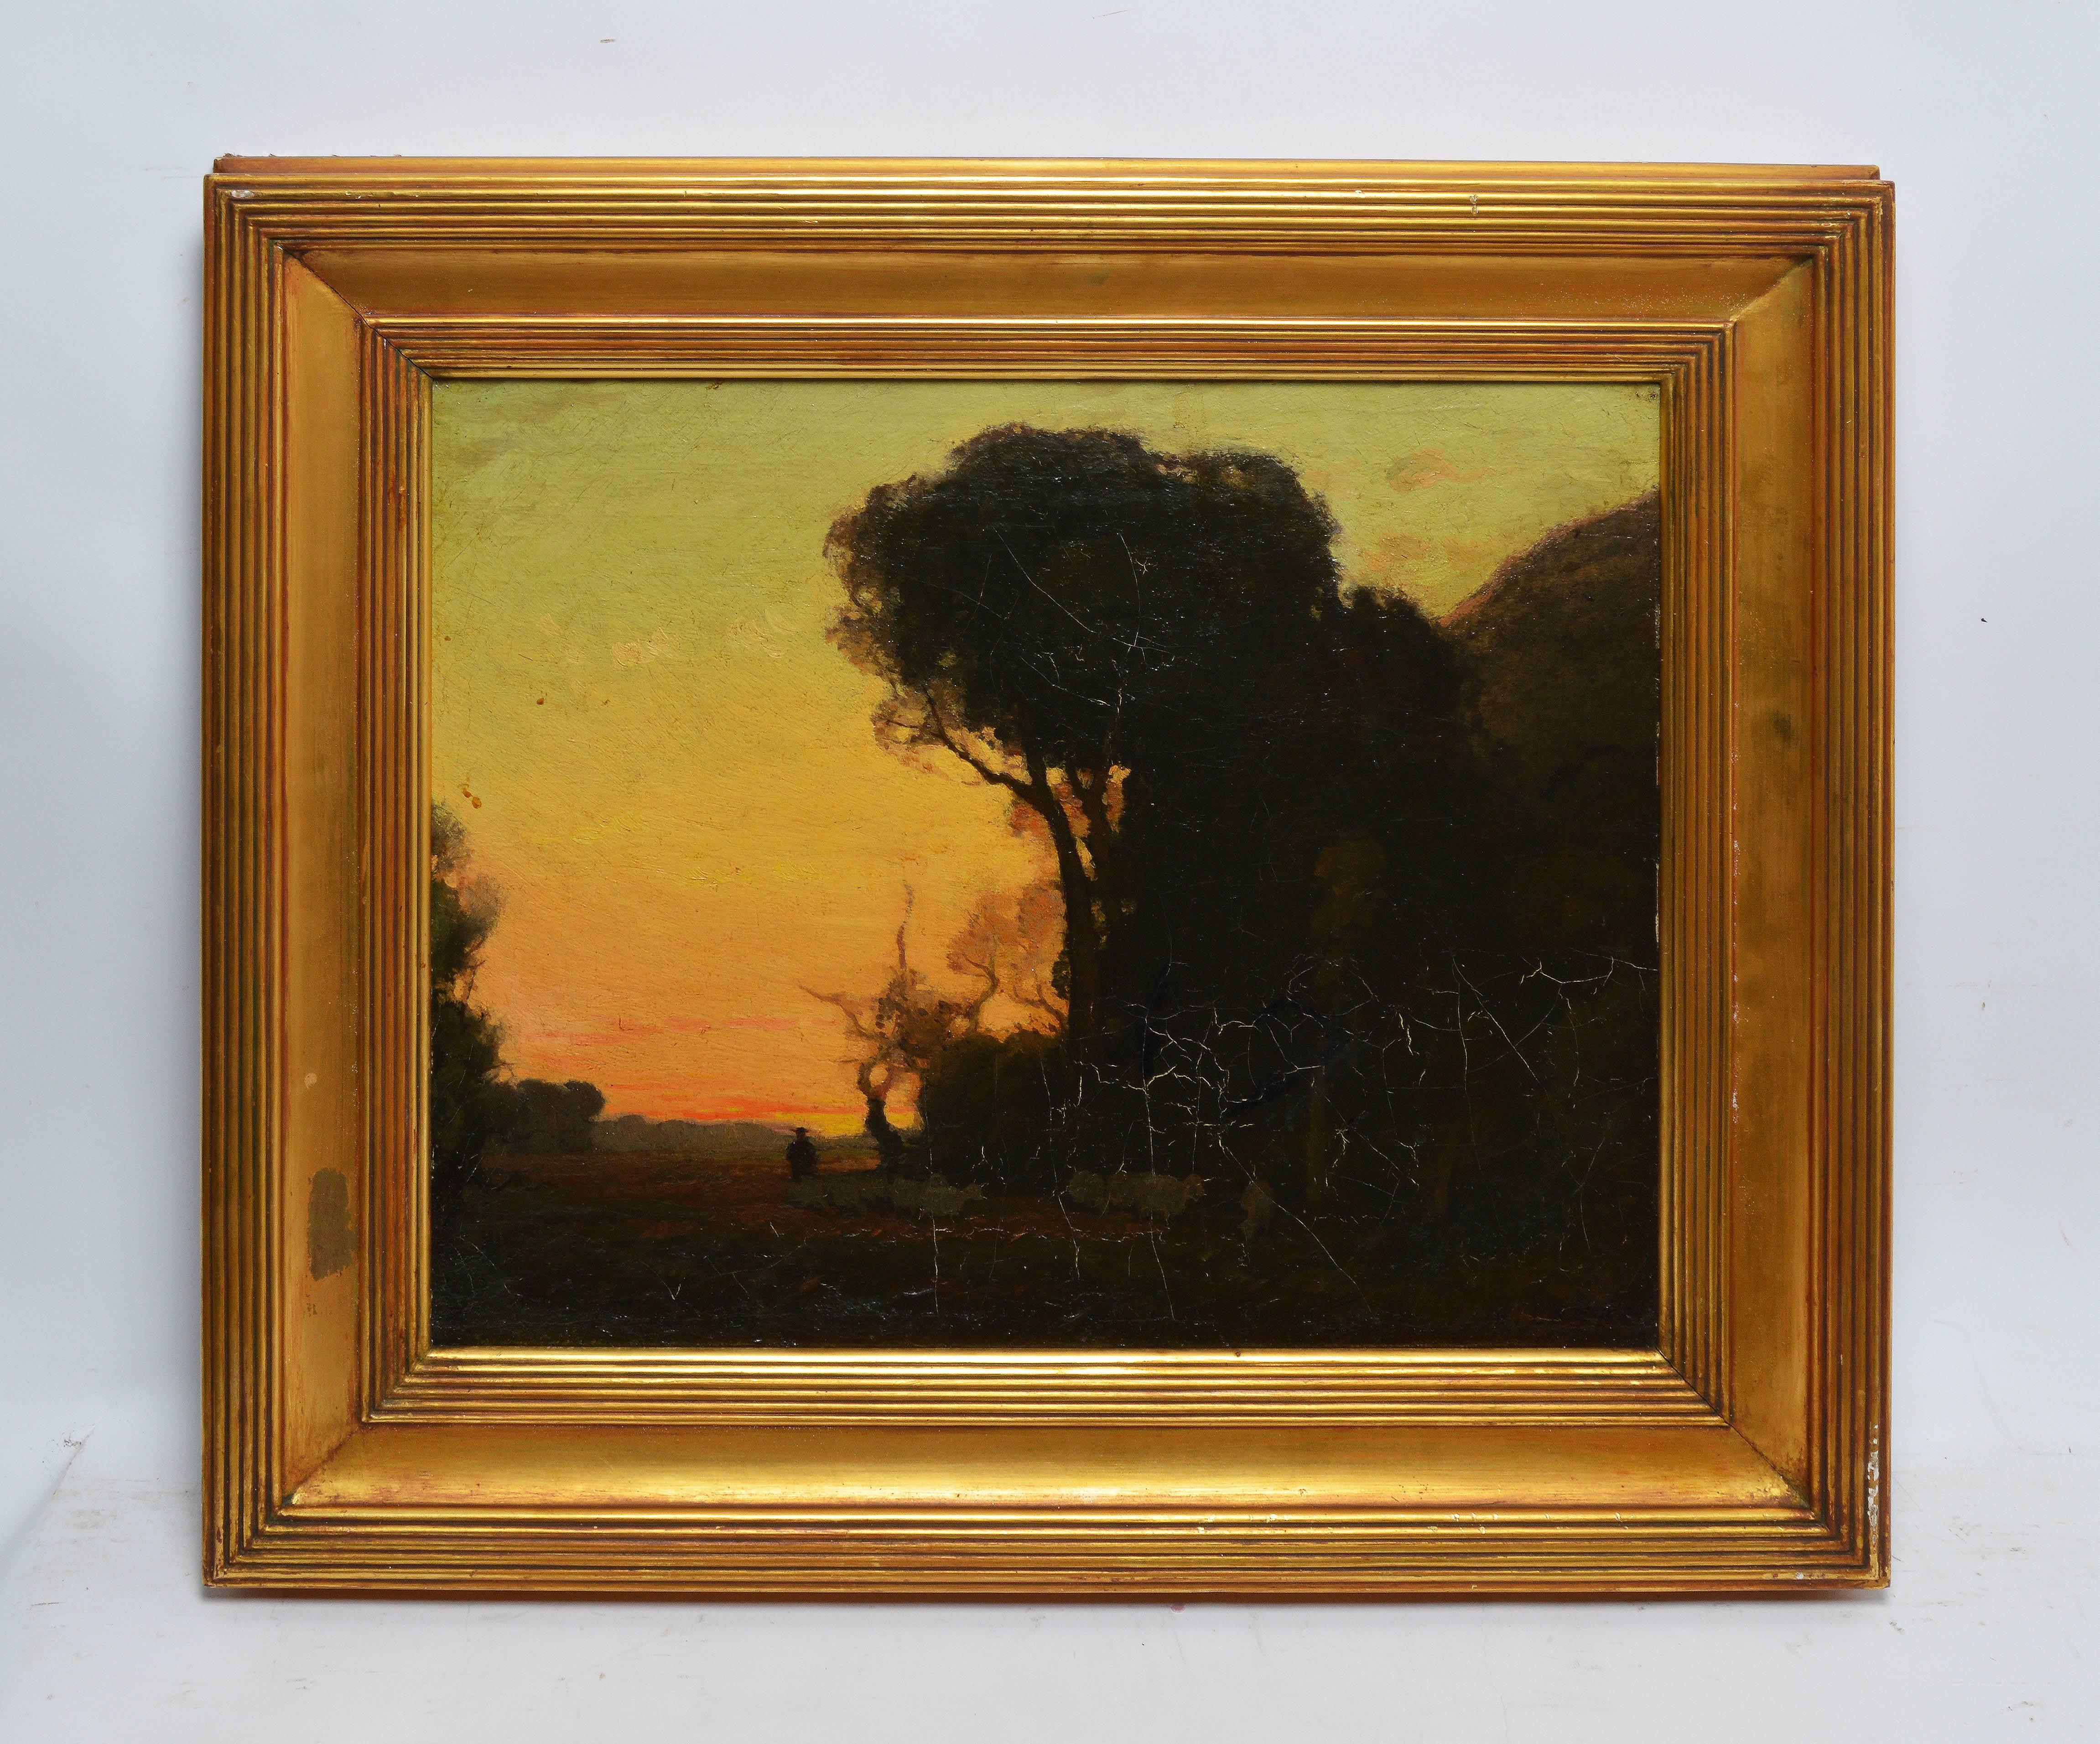 Tonalist sunset landscape by Charles Lasar  (1856 - 1936).  Oil on canvas, circa 1885.   Signed lower right.  Displayed in a giltwood frame.  Image size, 18"L x 15"H, overall 24"L x 21"H.